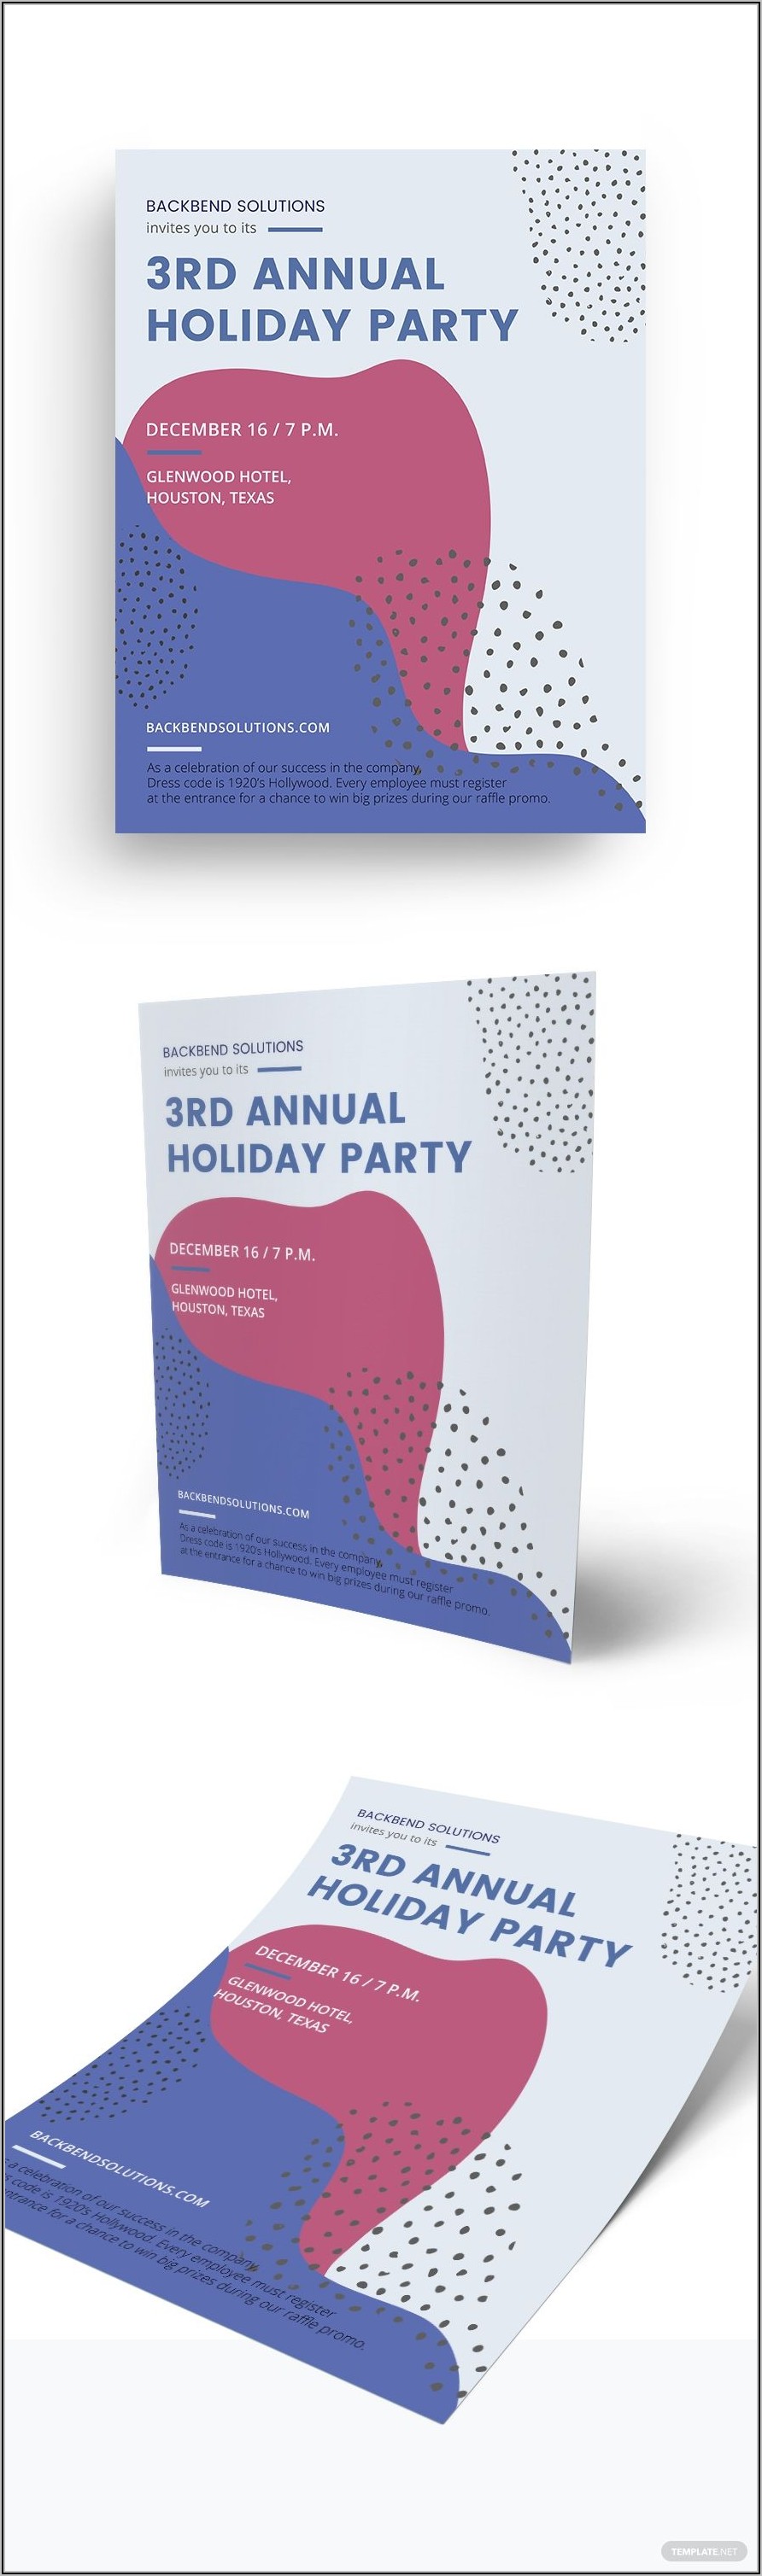 Company Holiday Party Flyer Template Free